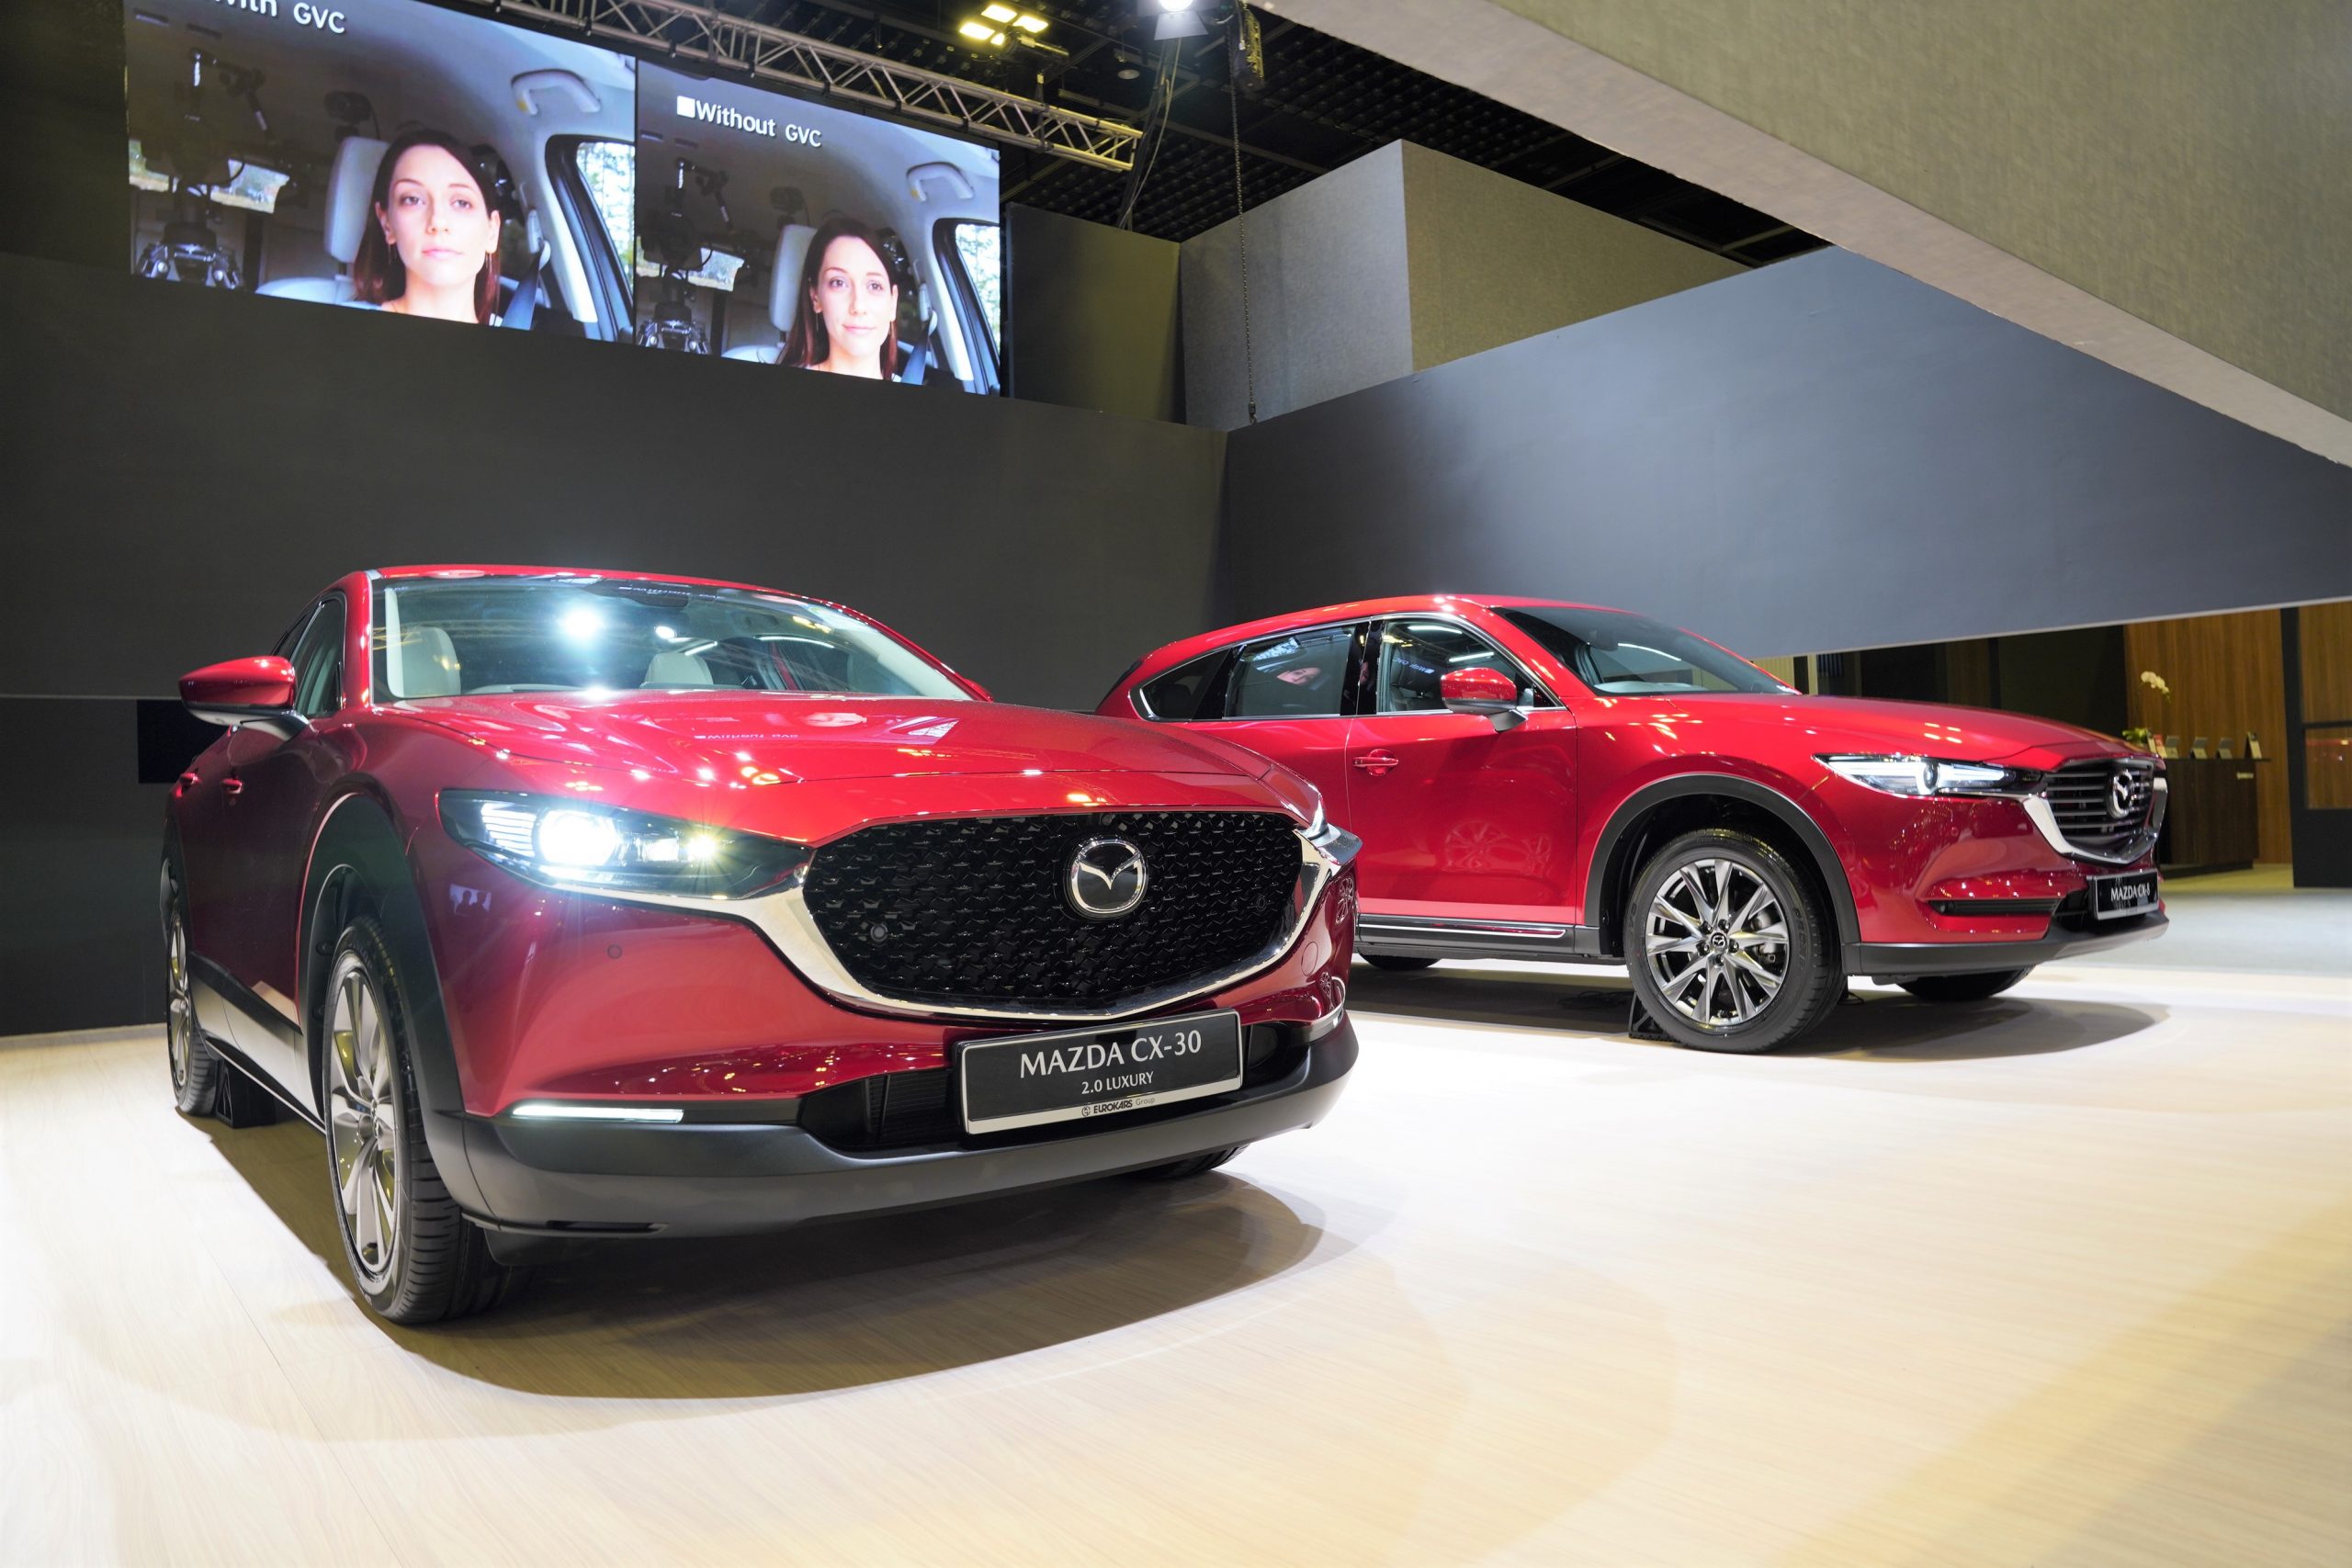 The all-new Mazda CX-30 and Mazda CX-8 on display at the Singapore Motorshow 2020